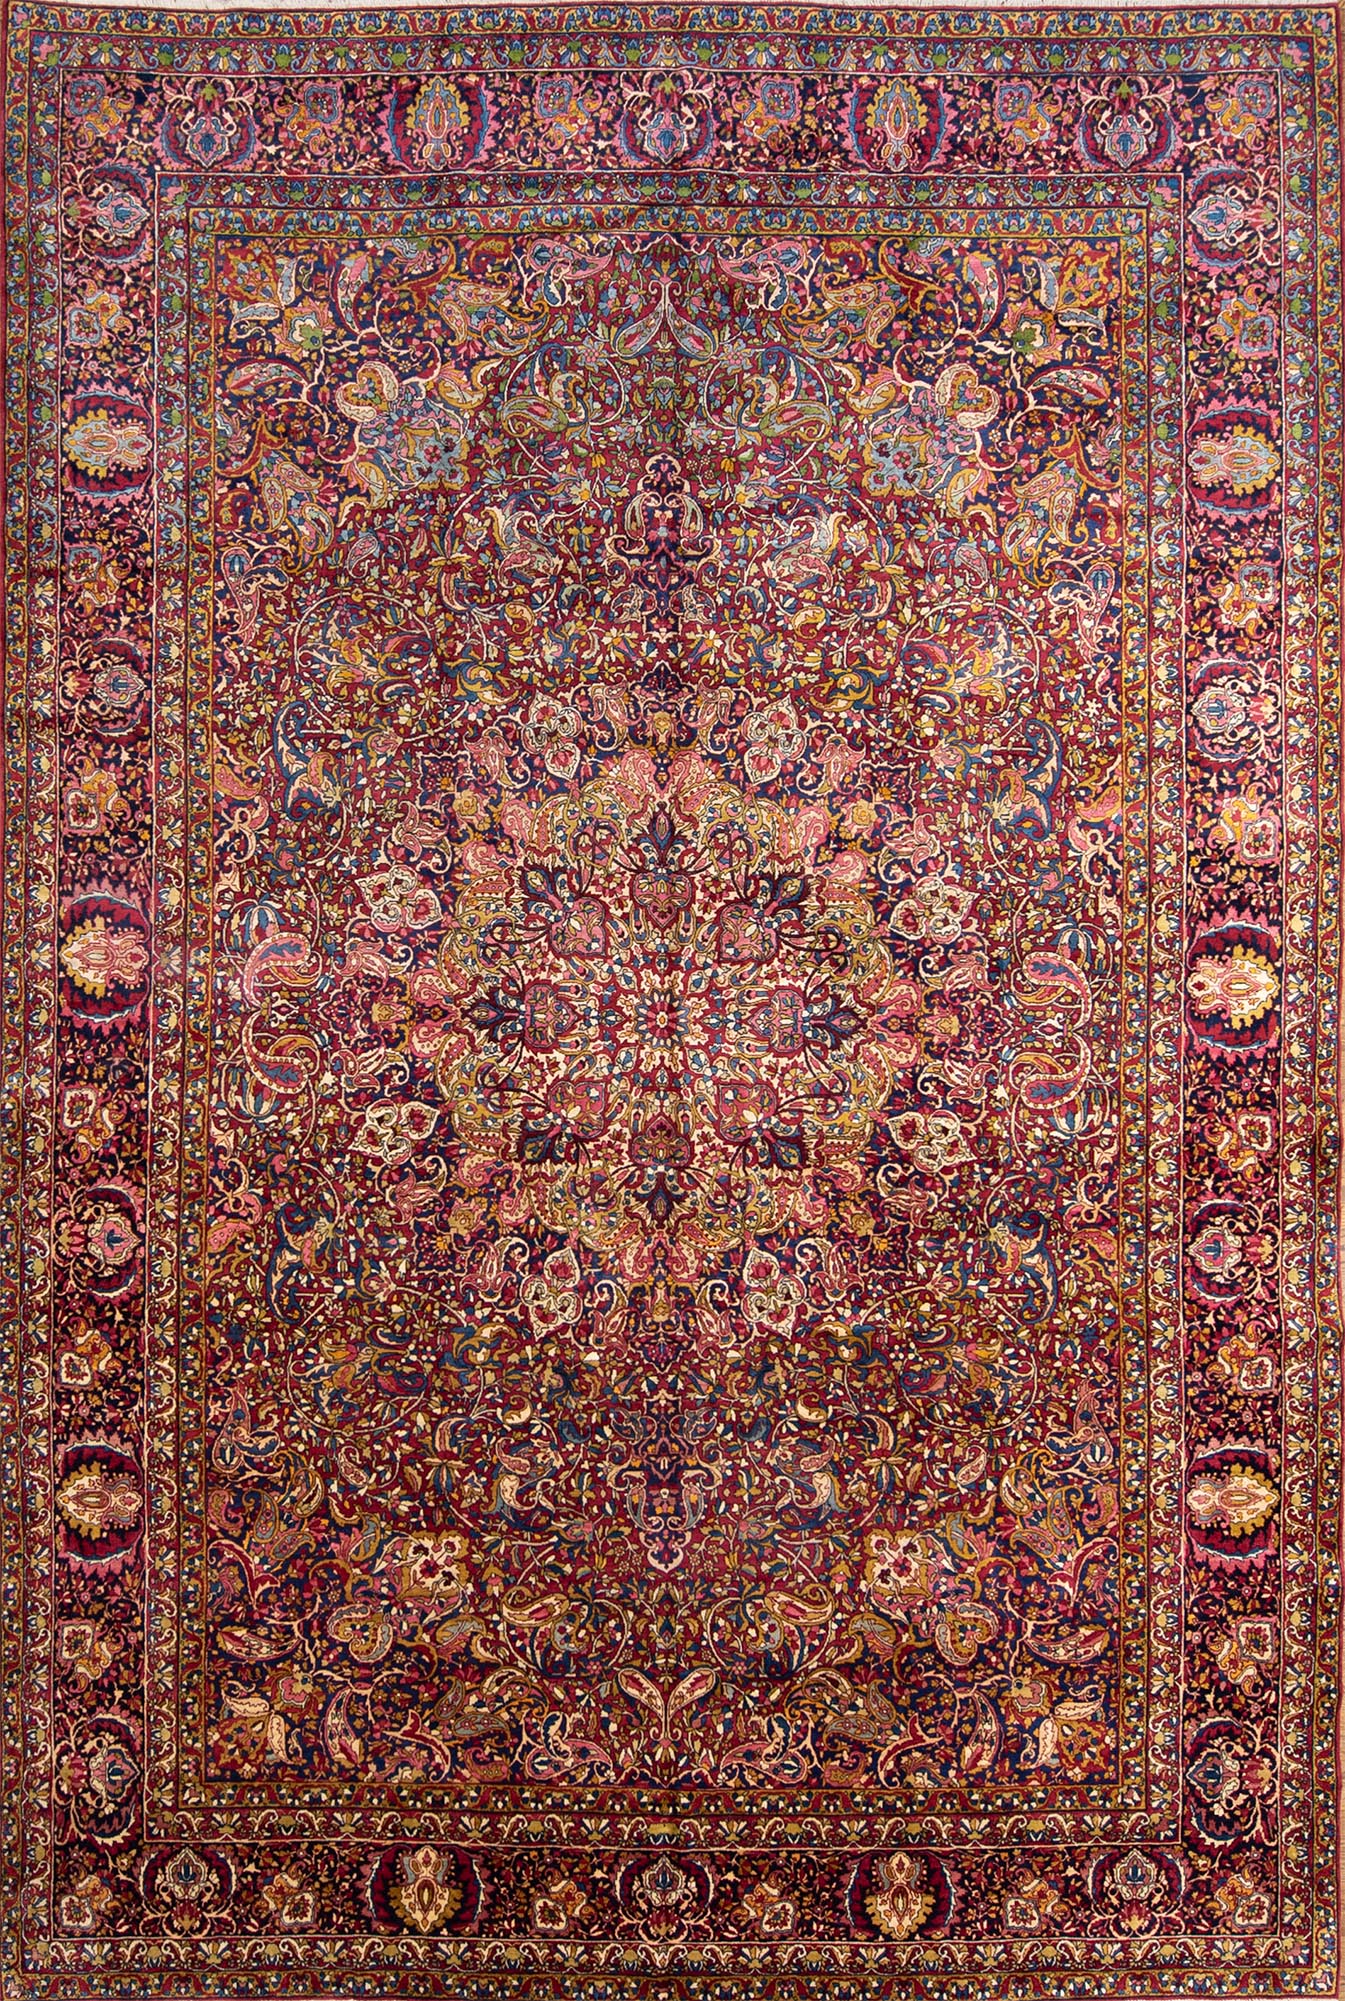 Antique rug. Handmade Persian Yazd antique rug, Multicolor with red and pink. Size 10.3x15.